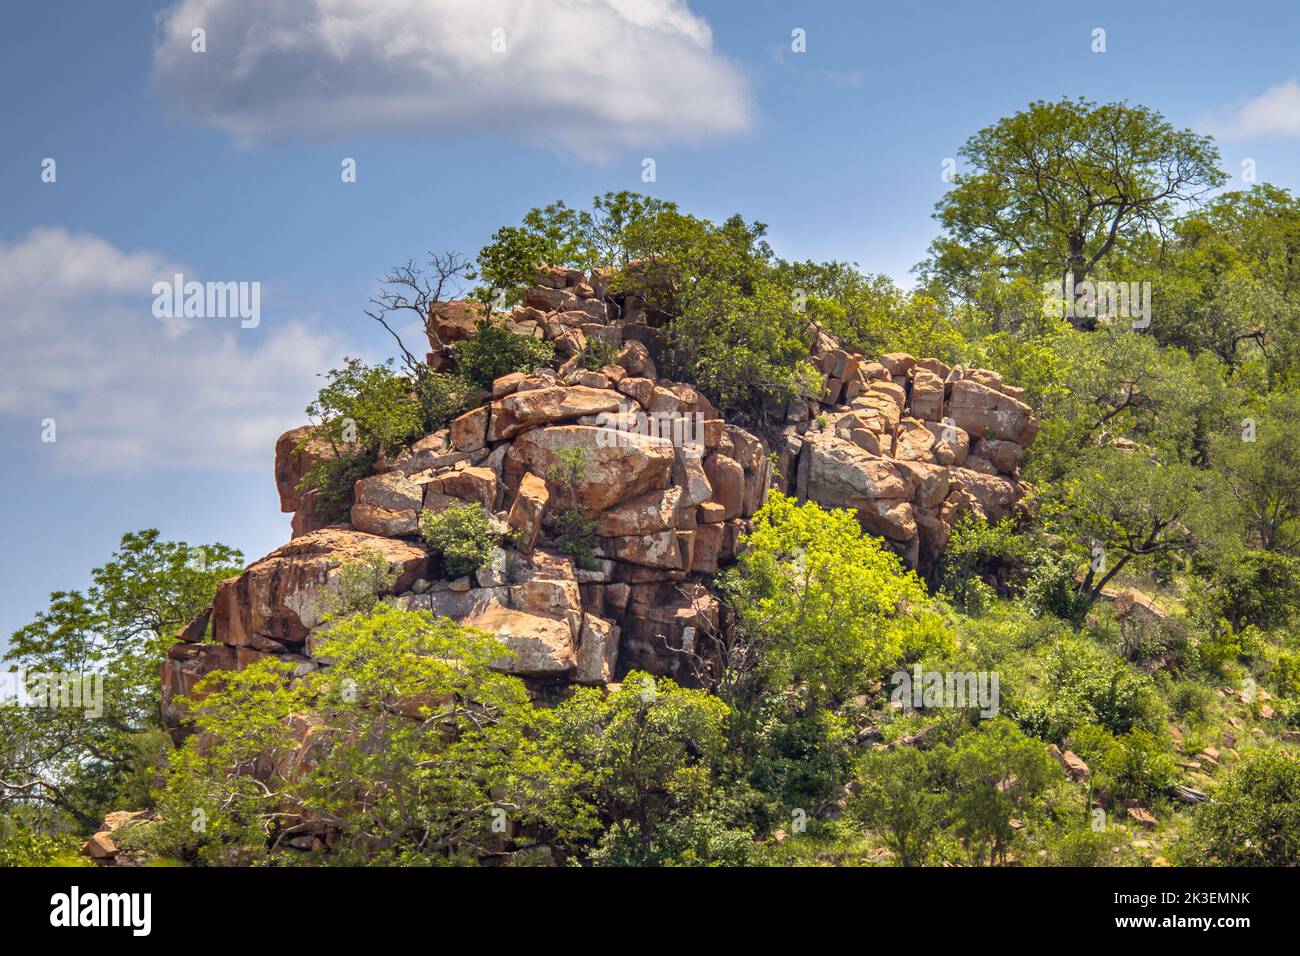 Rhyolitic rocky outcrop or koppie in Kruger national park South Africa Stock Photo